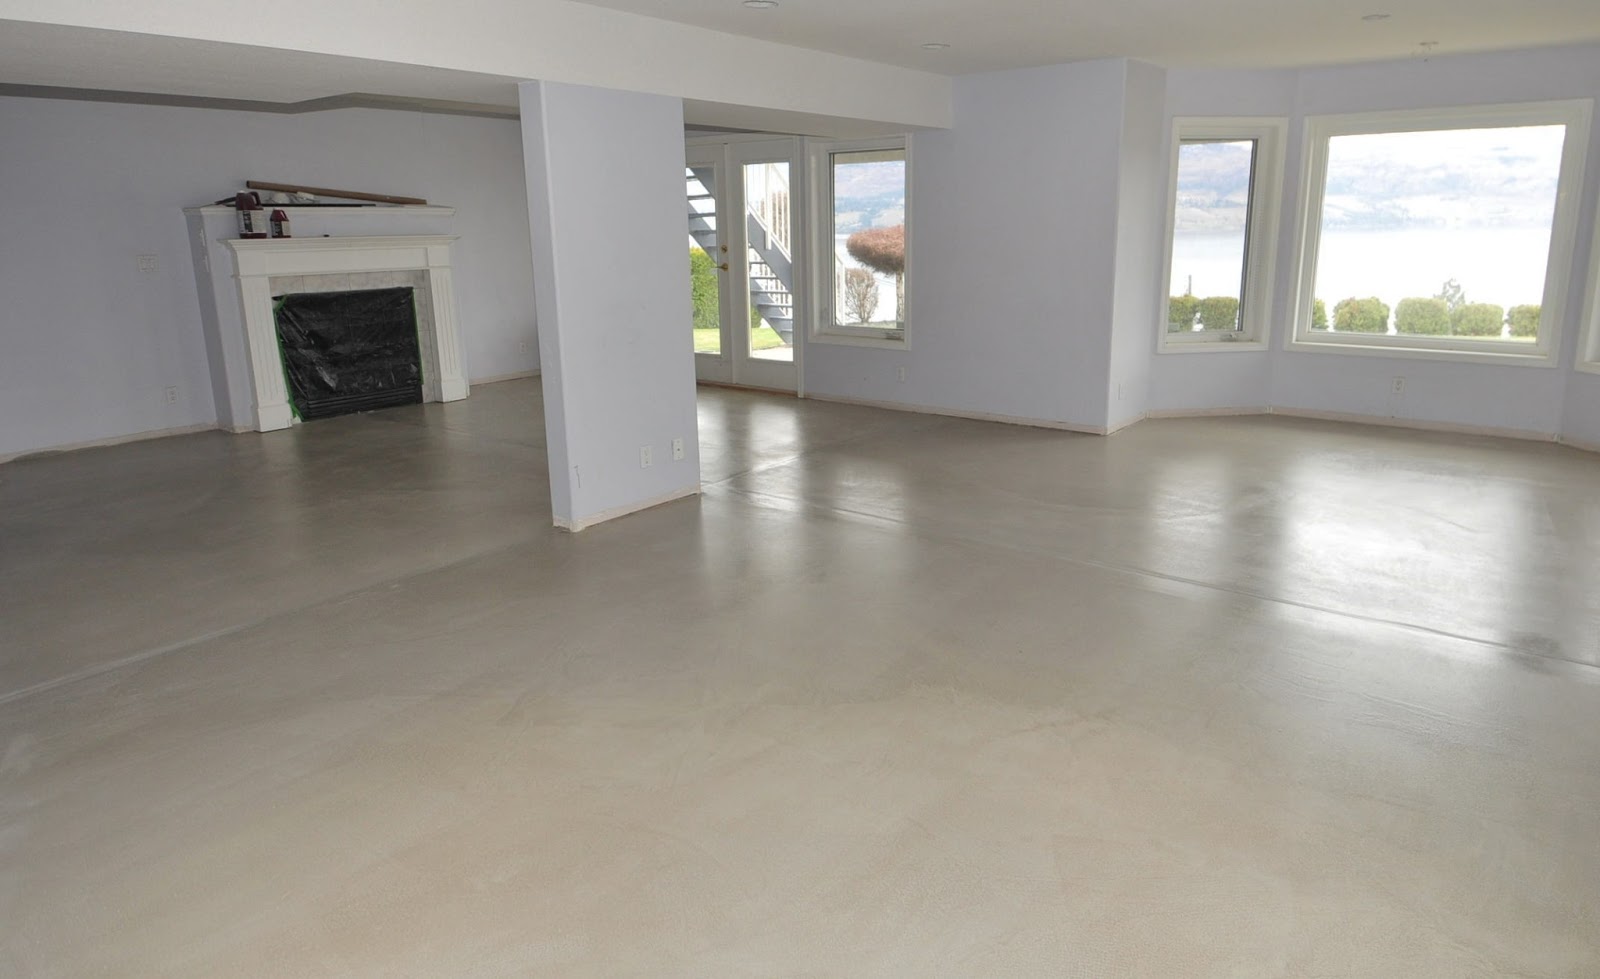 MODE CONCRETE Concrete Floors Are Ultra Modern Industrial And